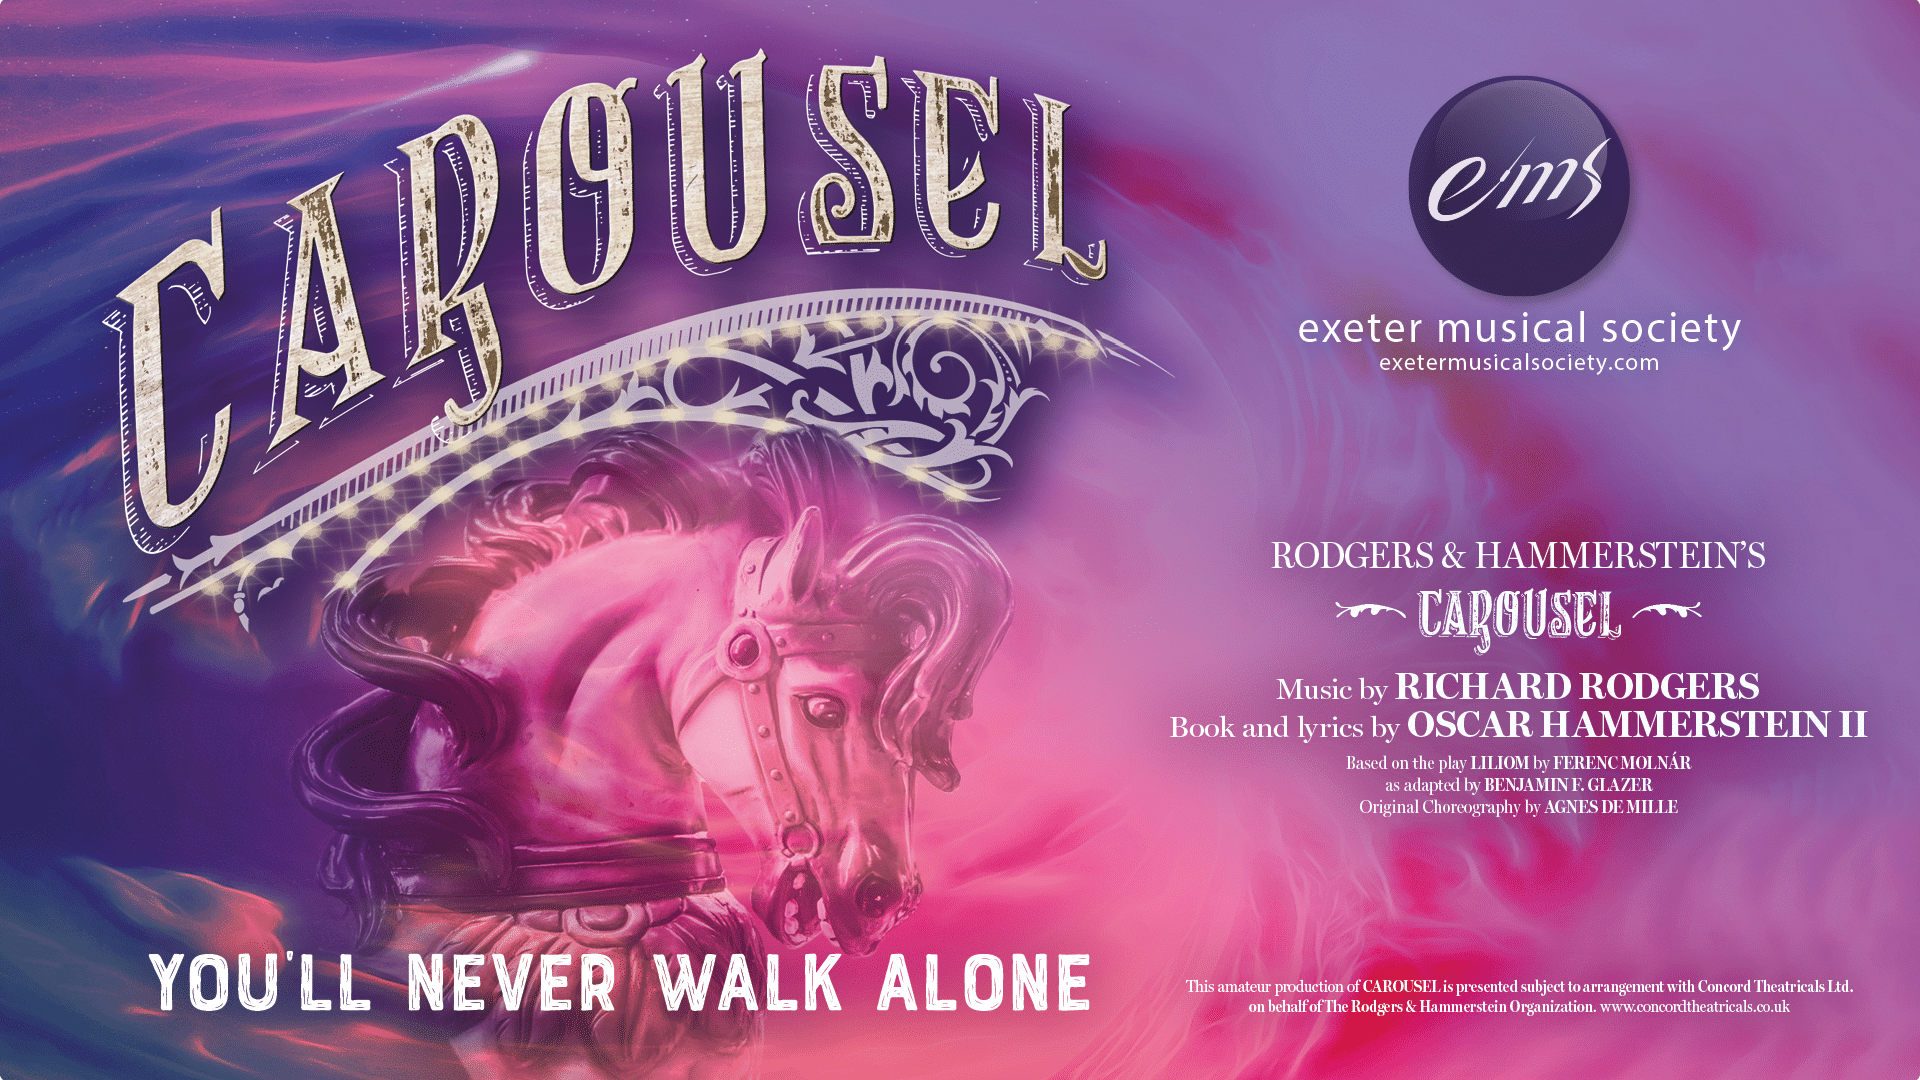 Carousel promo artwork: a ghostly merry-go-round horse is illustrated among swirls of purple and pink smoke; ornate white text reads 'Carousel; You'll never walk alone'; white small print reads 'Rodgers & Hammerstein's Carousel; Music by Richard Rodgers; Book and lyrics by Oscar Hammerstein II; Based on the play Liliom by Frerenc Molnár as adapted by Benjamin Glazer; Original Choreography by Agnes De Mille; This amateur production of Carousel is presented subject to arrangement with Concord Theatricals Ltd. on behalf of The Rodgers & Hammerstein Organization. www.concordtheatricals.co.uk' as well as the EMS logo.